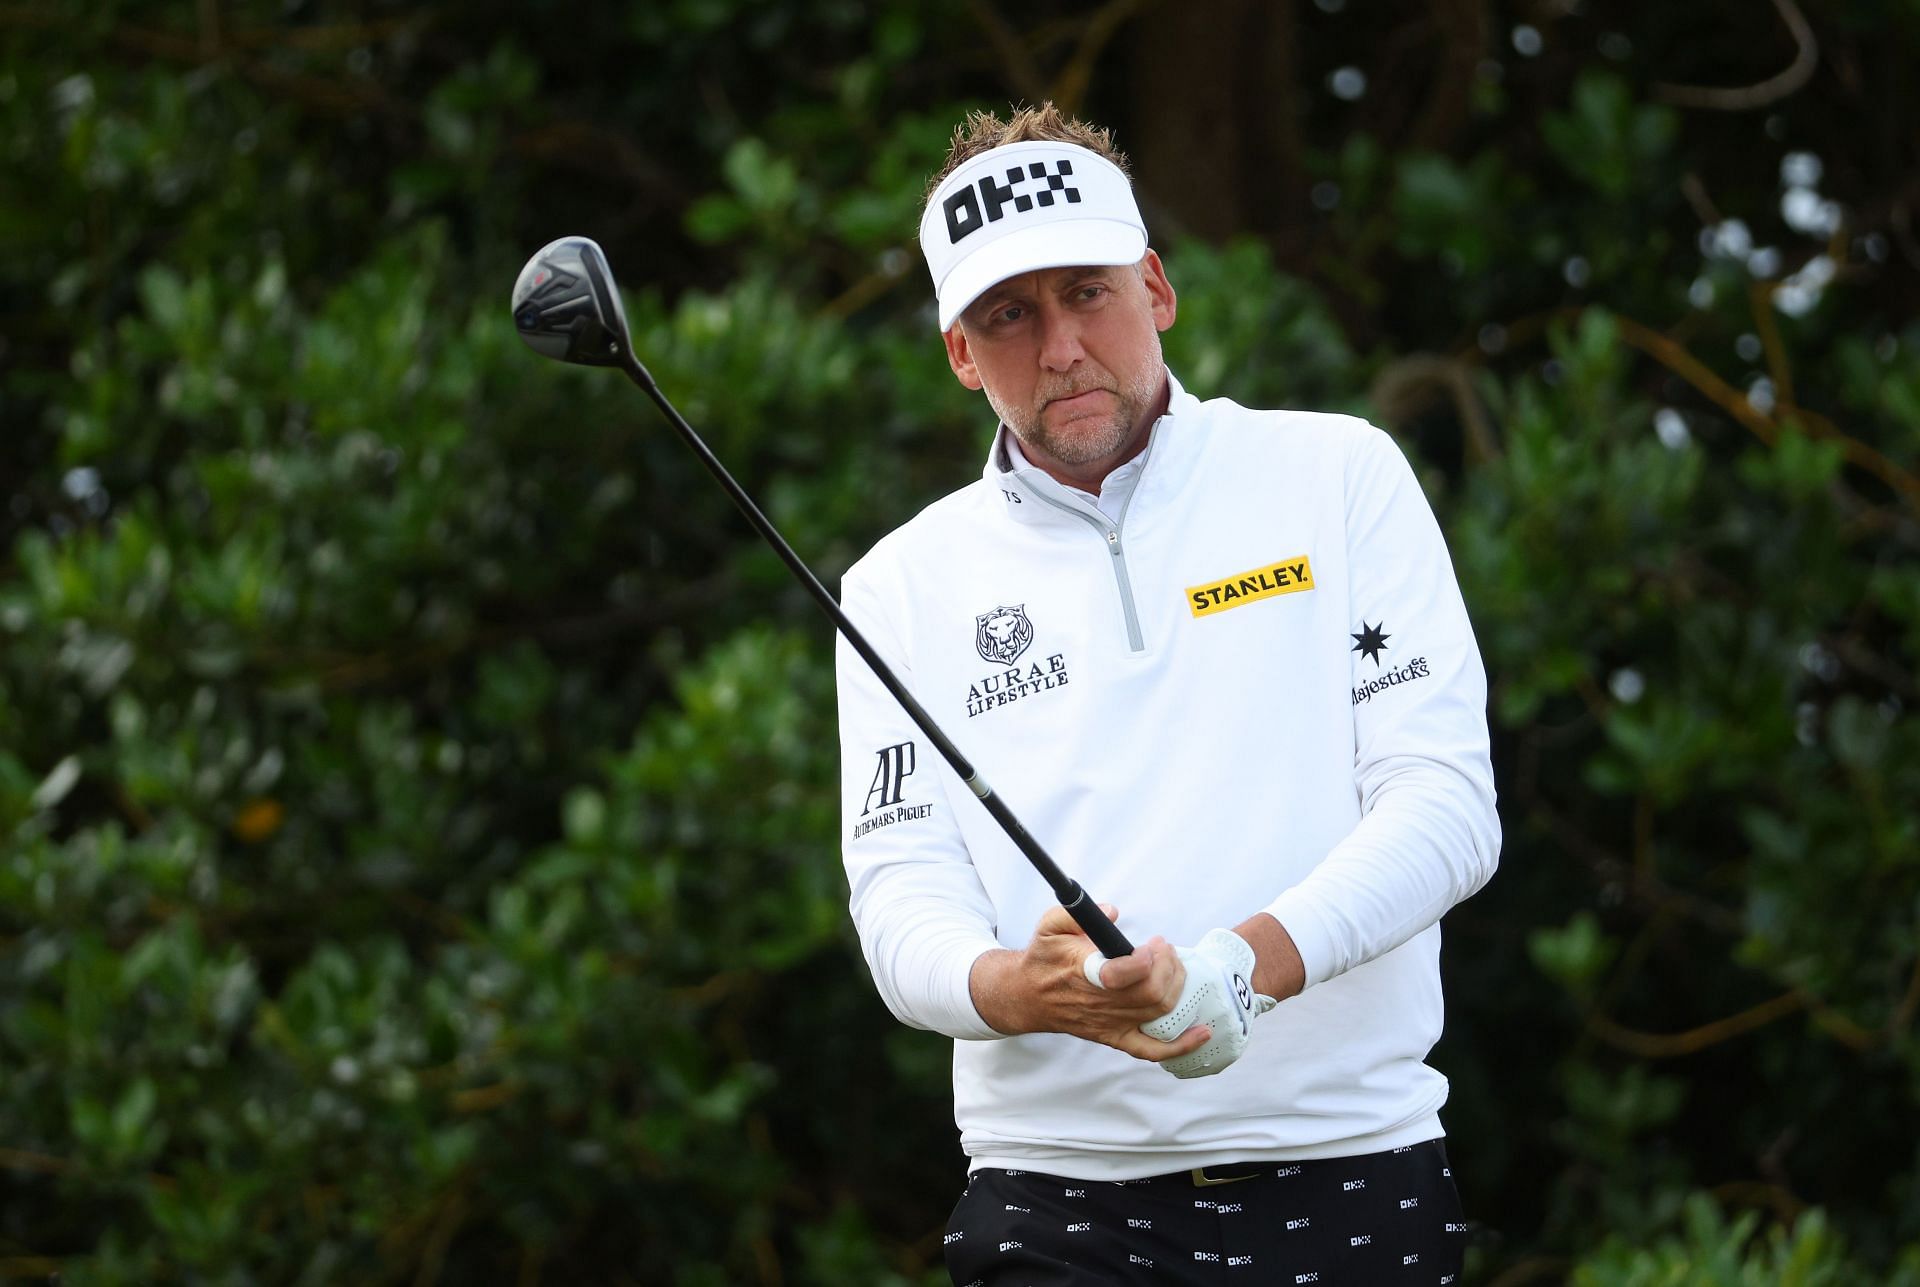 Ian Poulter at The 150th Open Championship (via Getty Images)